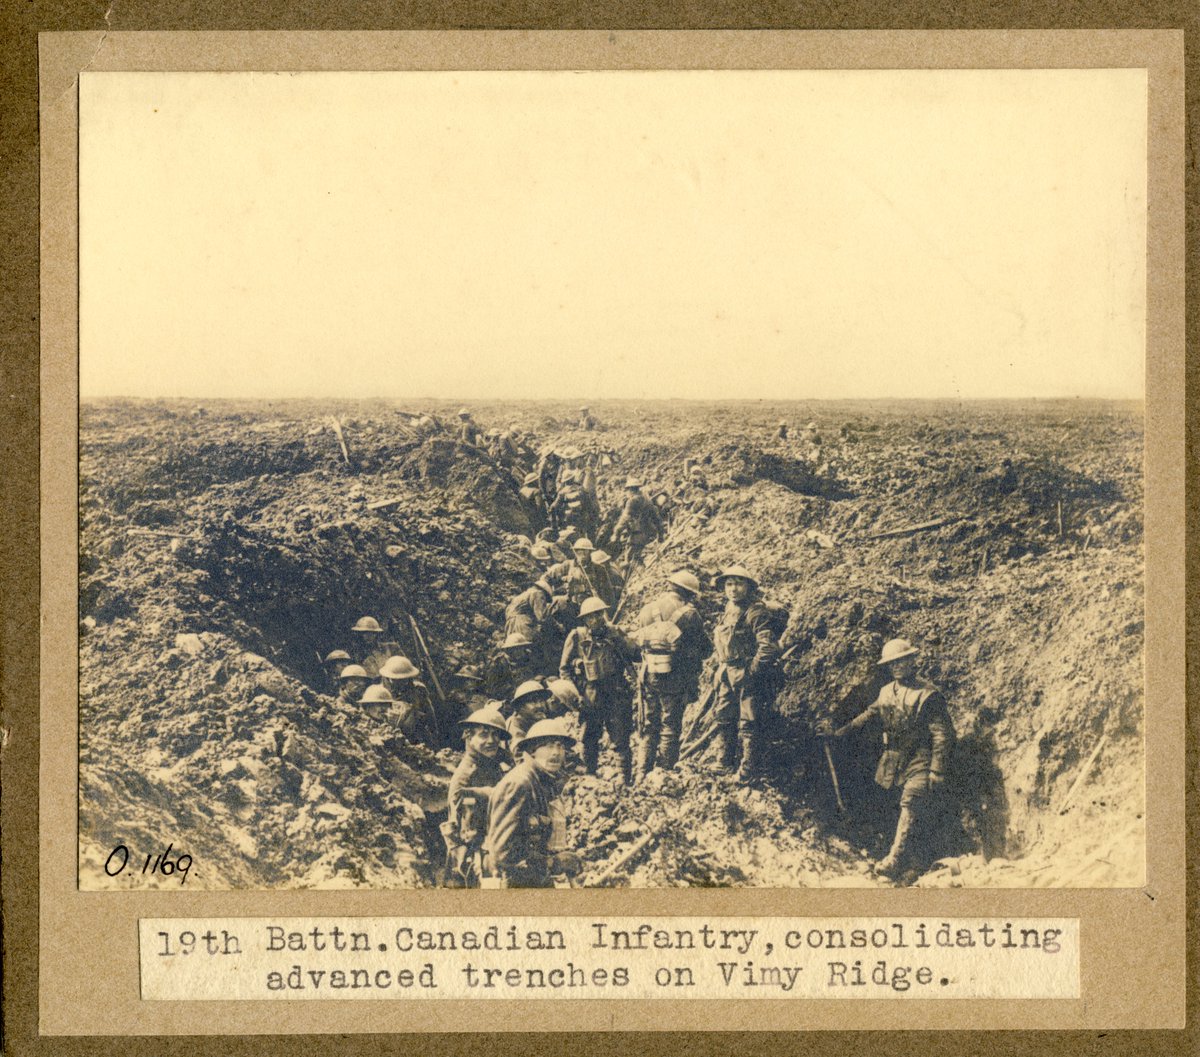 The battle looms large in Canadian memory of the Great War and was an impressive coming-of-age accomplishment for the Canadian Corps, but the capture of the ridge made no difference in the outcome of the war* and was just another day of fighting on the Western Front.5/19